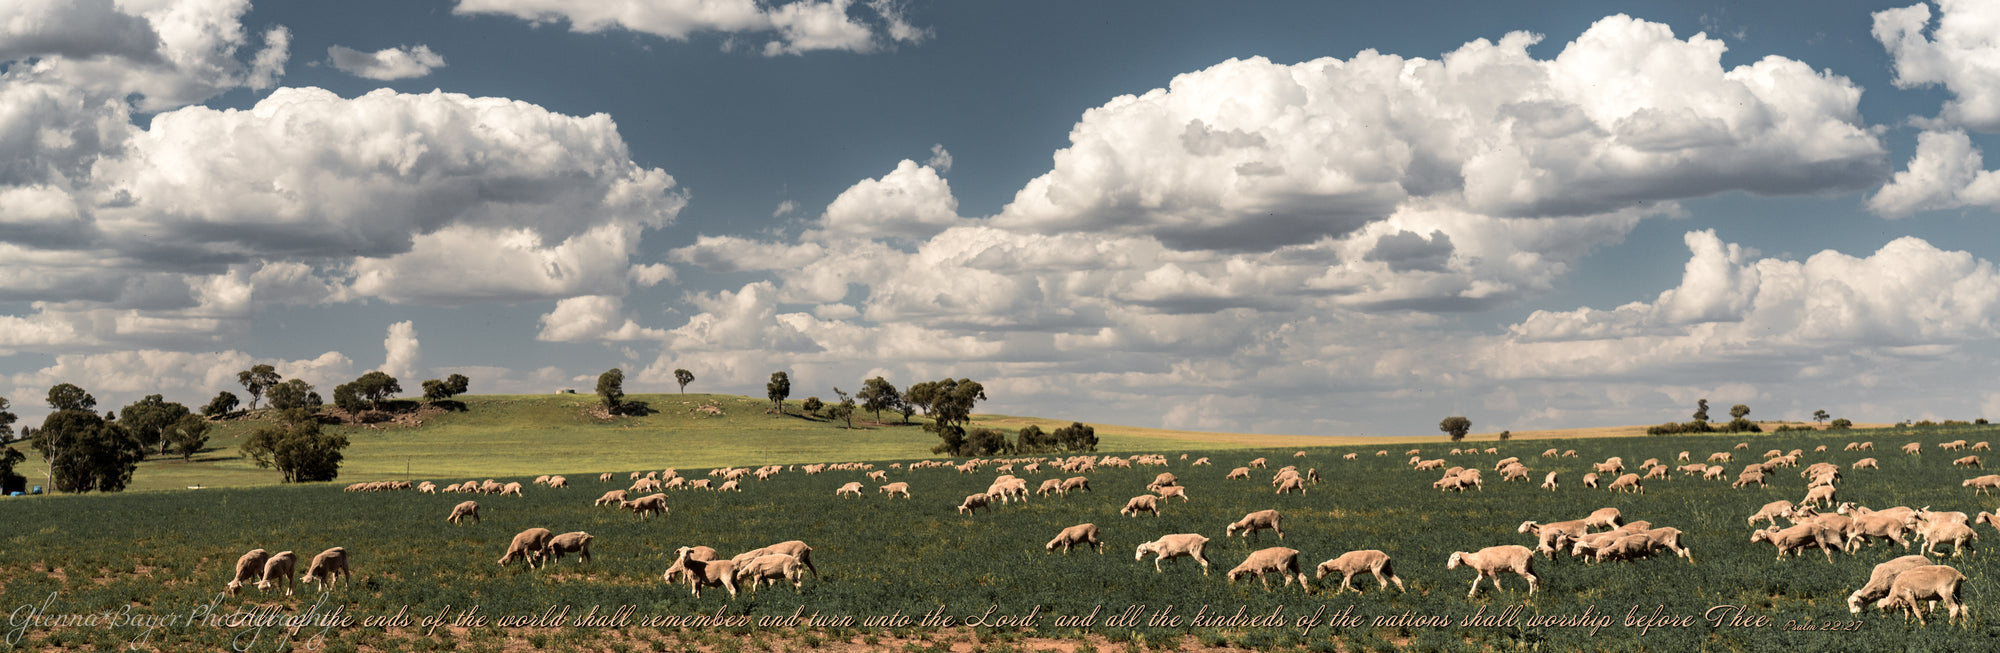 Herd of sheep grazing in wide open field with puffy clouds